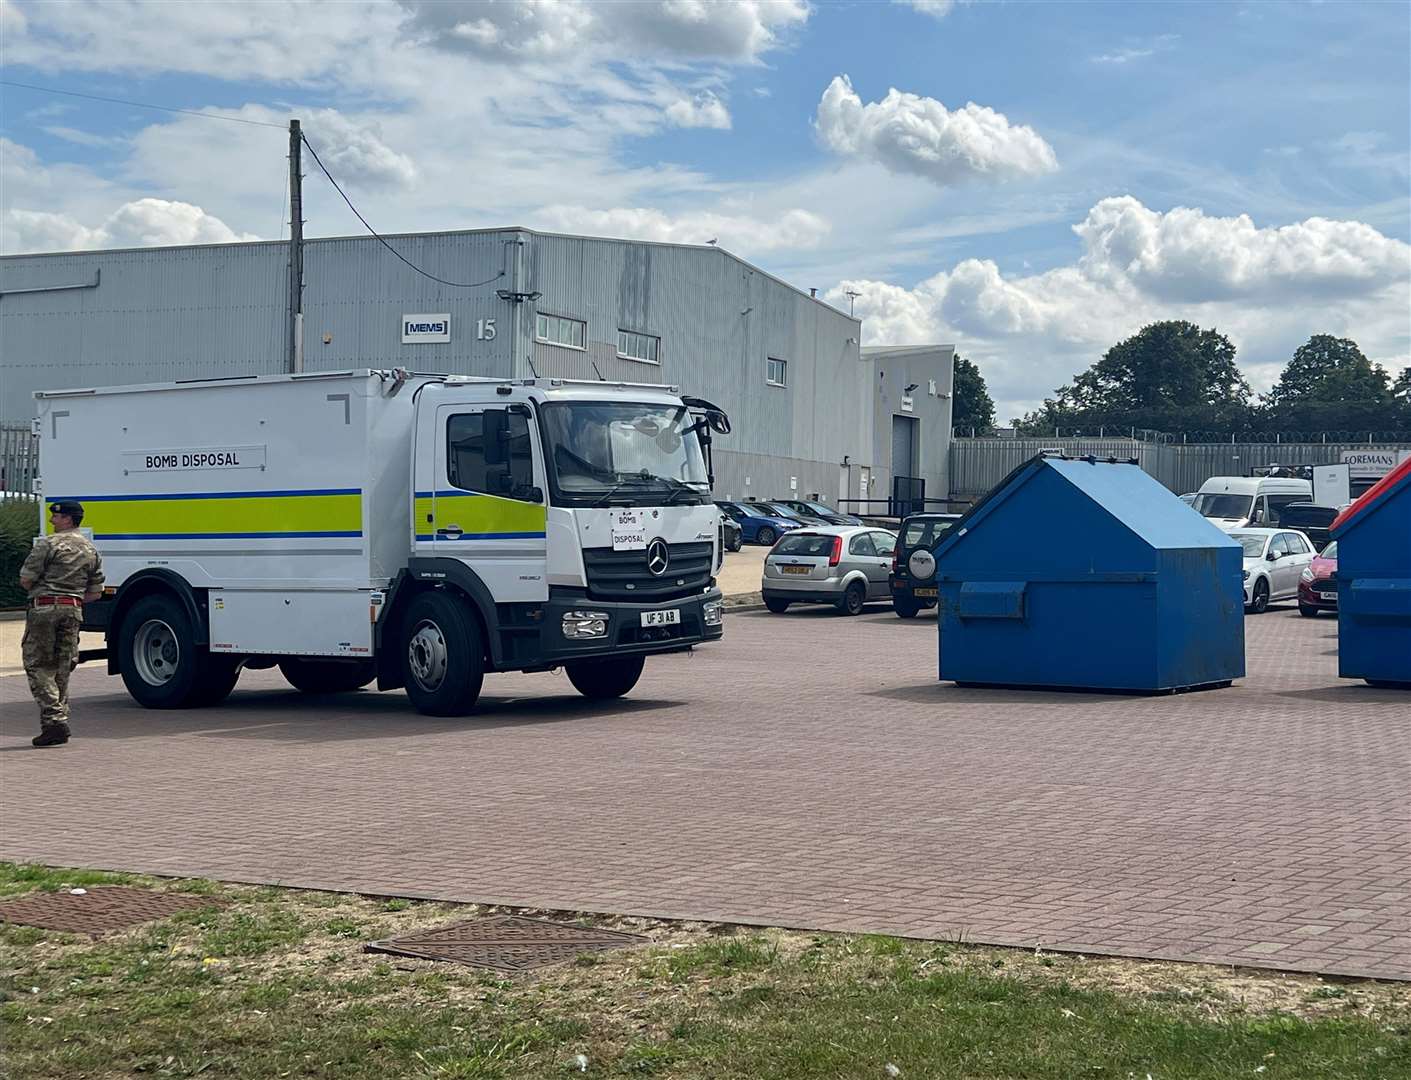 Bomb disposal units were called to Beechings Way Industrial Centre in Gooden Way, Twydall, Gillingham, after a reported bomb alert